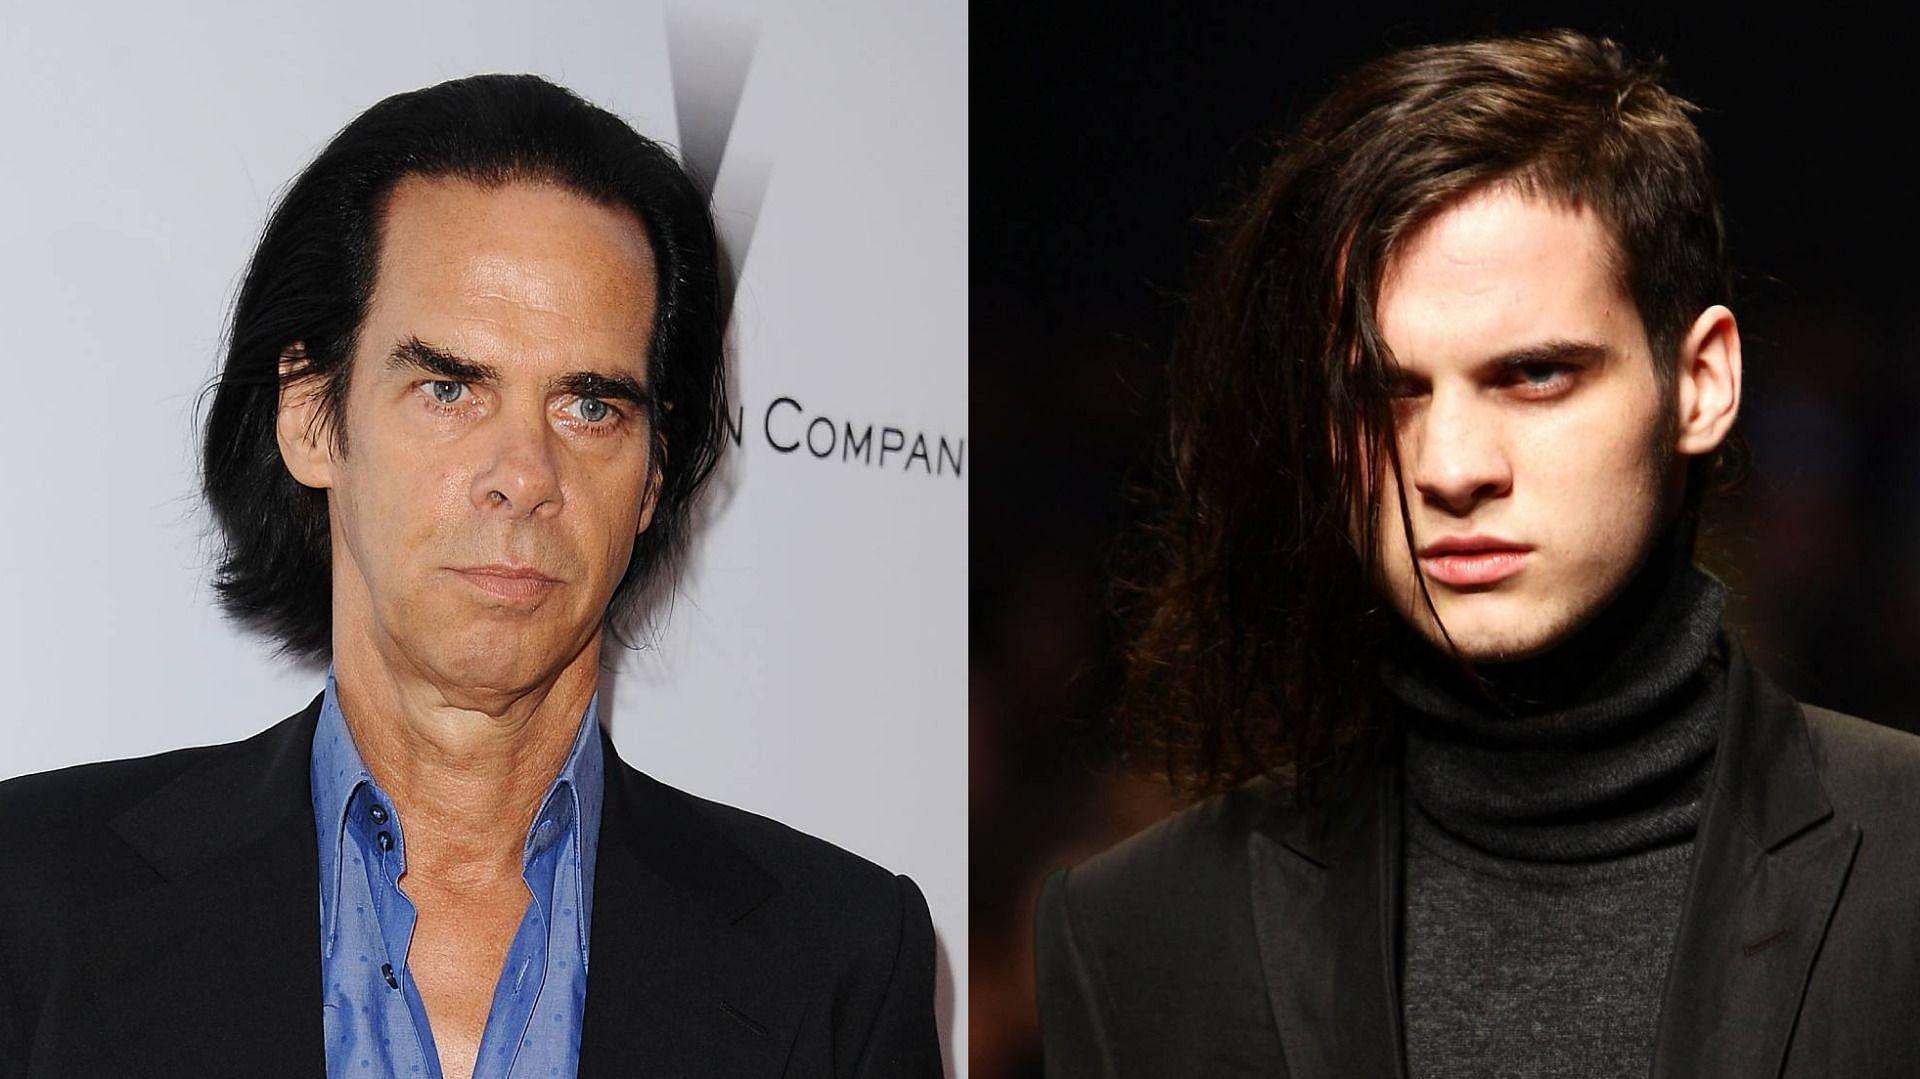 Nick Cave and his son Jethro (Image via Getty Images)